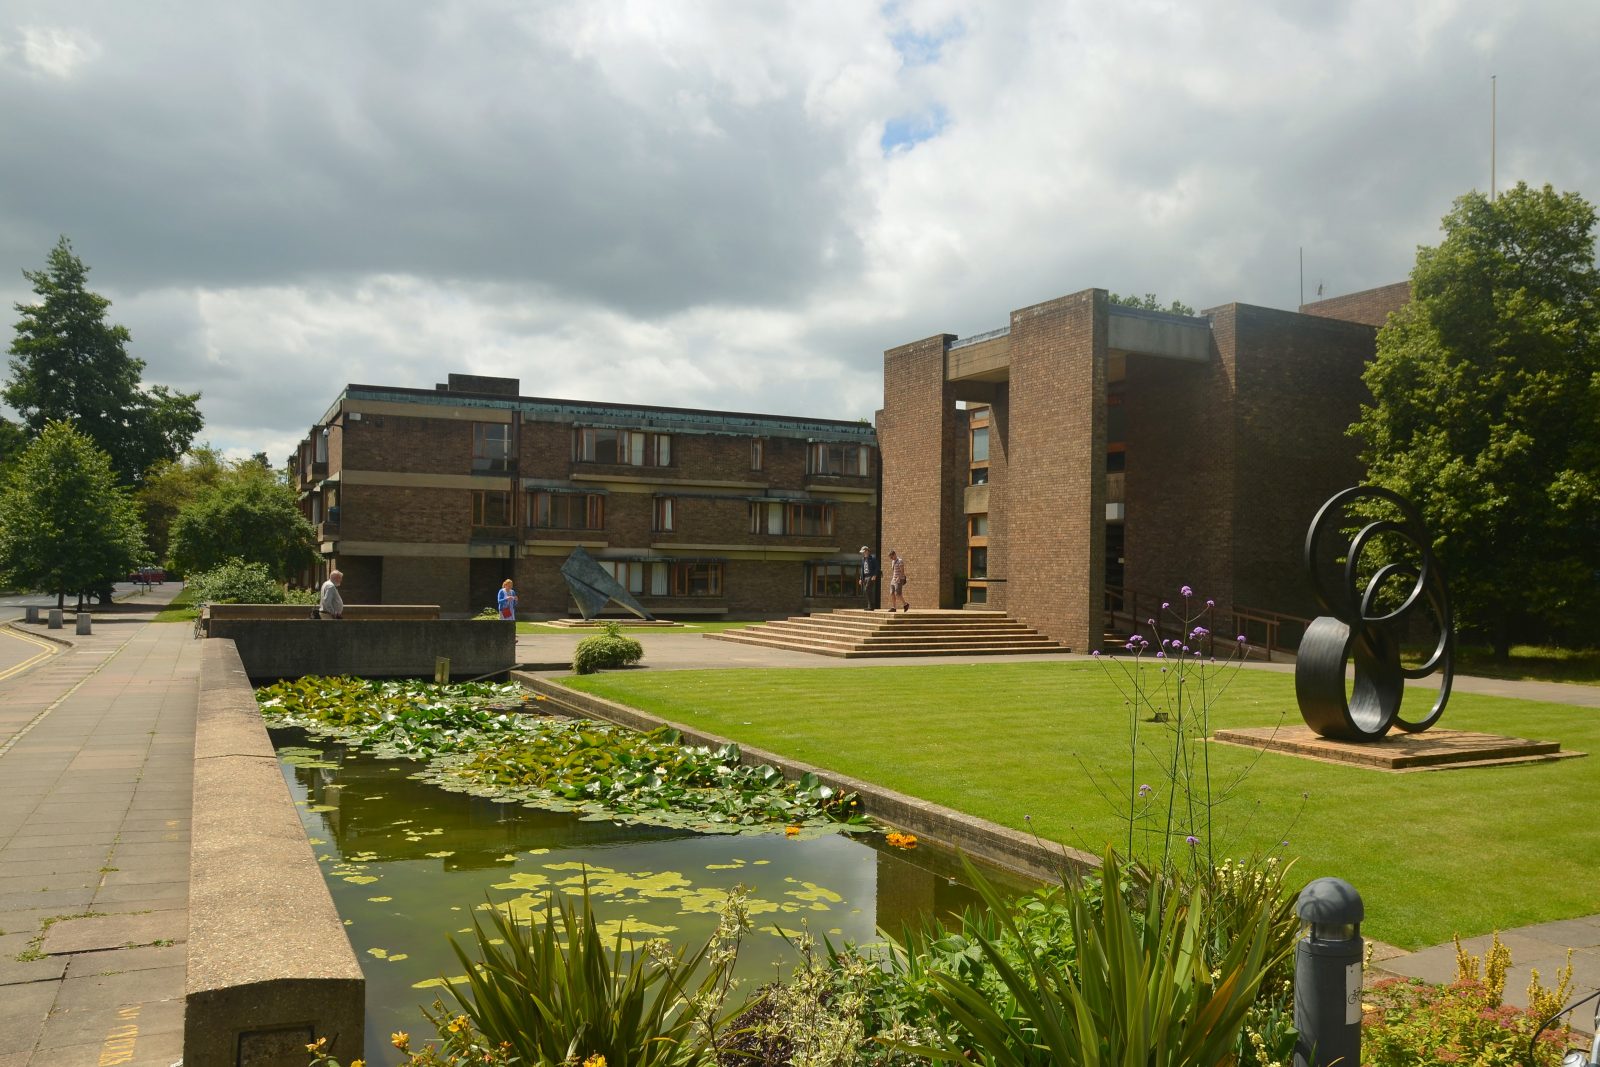 Storey's Way and the main entrance of Churchill College, Cambridge in June 2019.